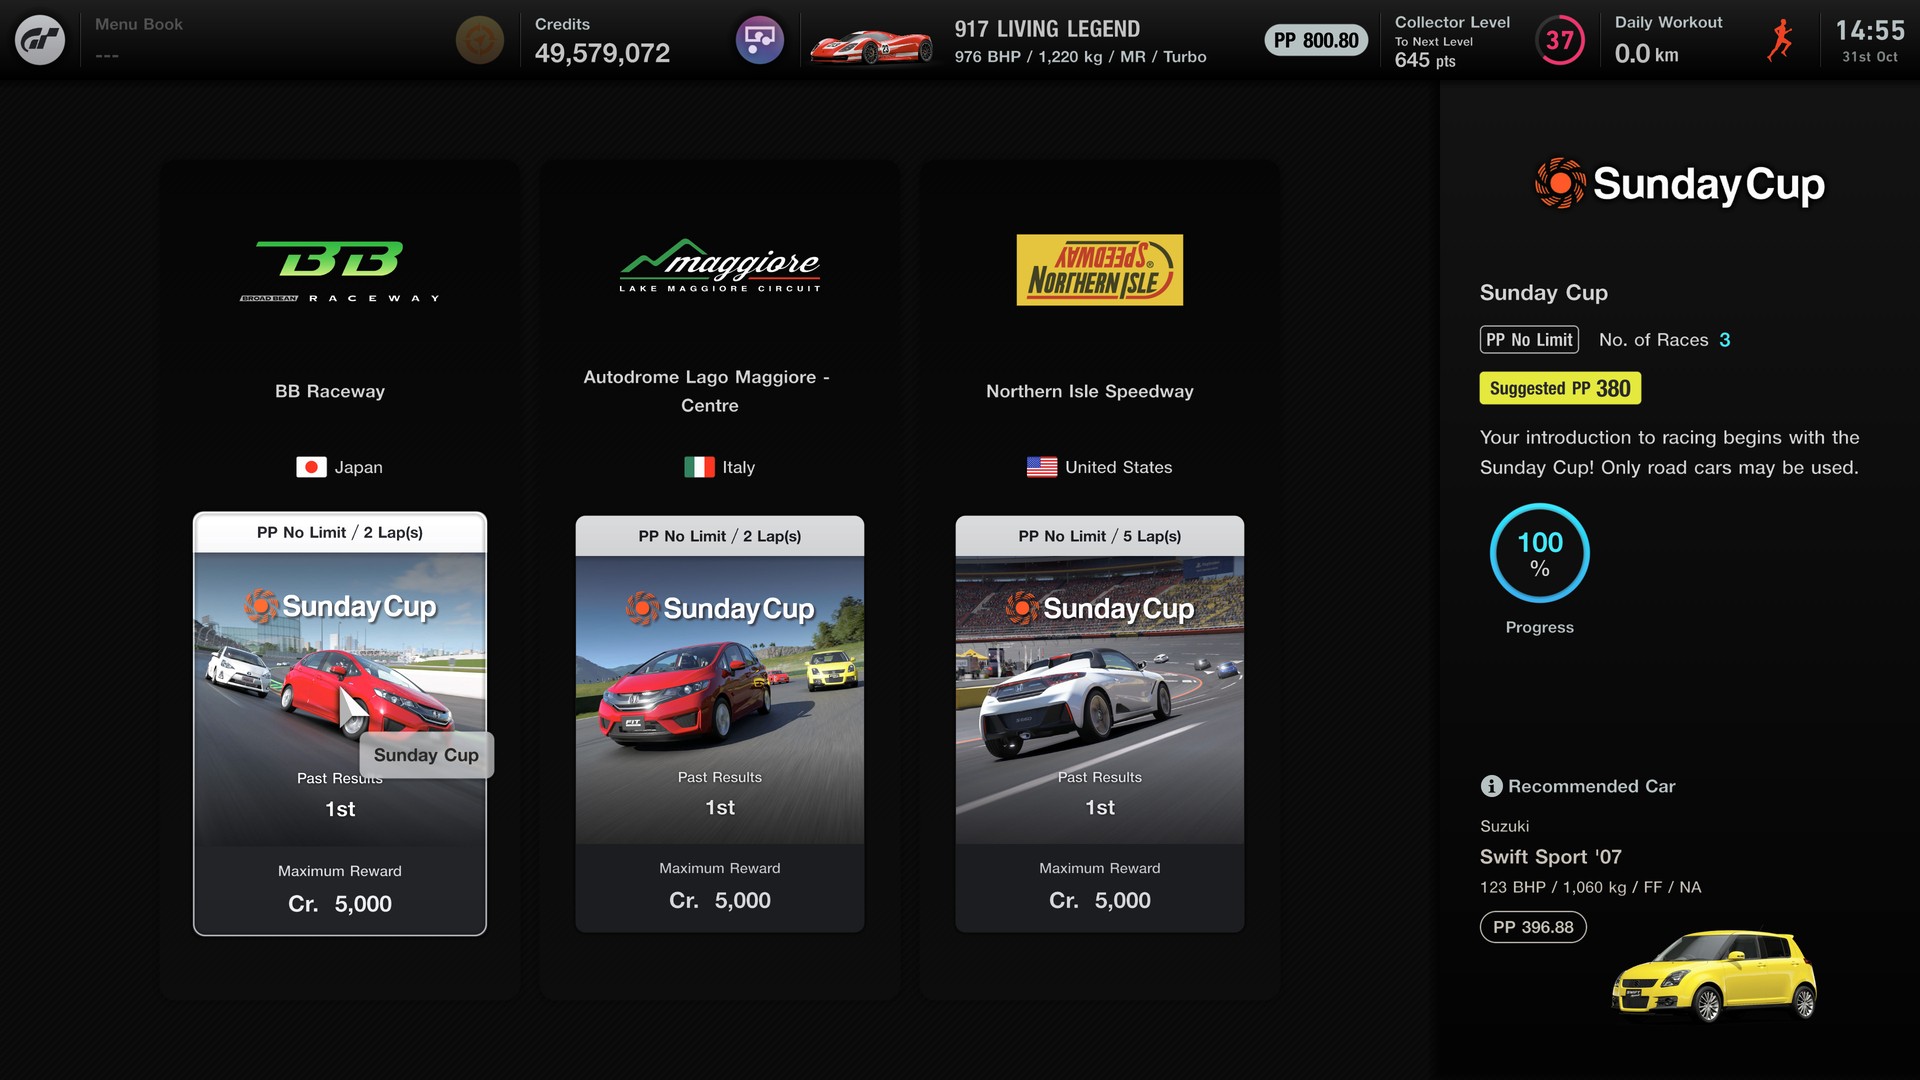 Gran Turismo 7 Spec II Now Available: New Cars, New Track, More